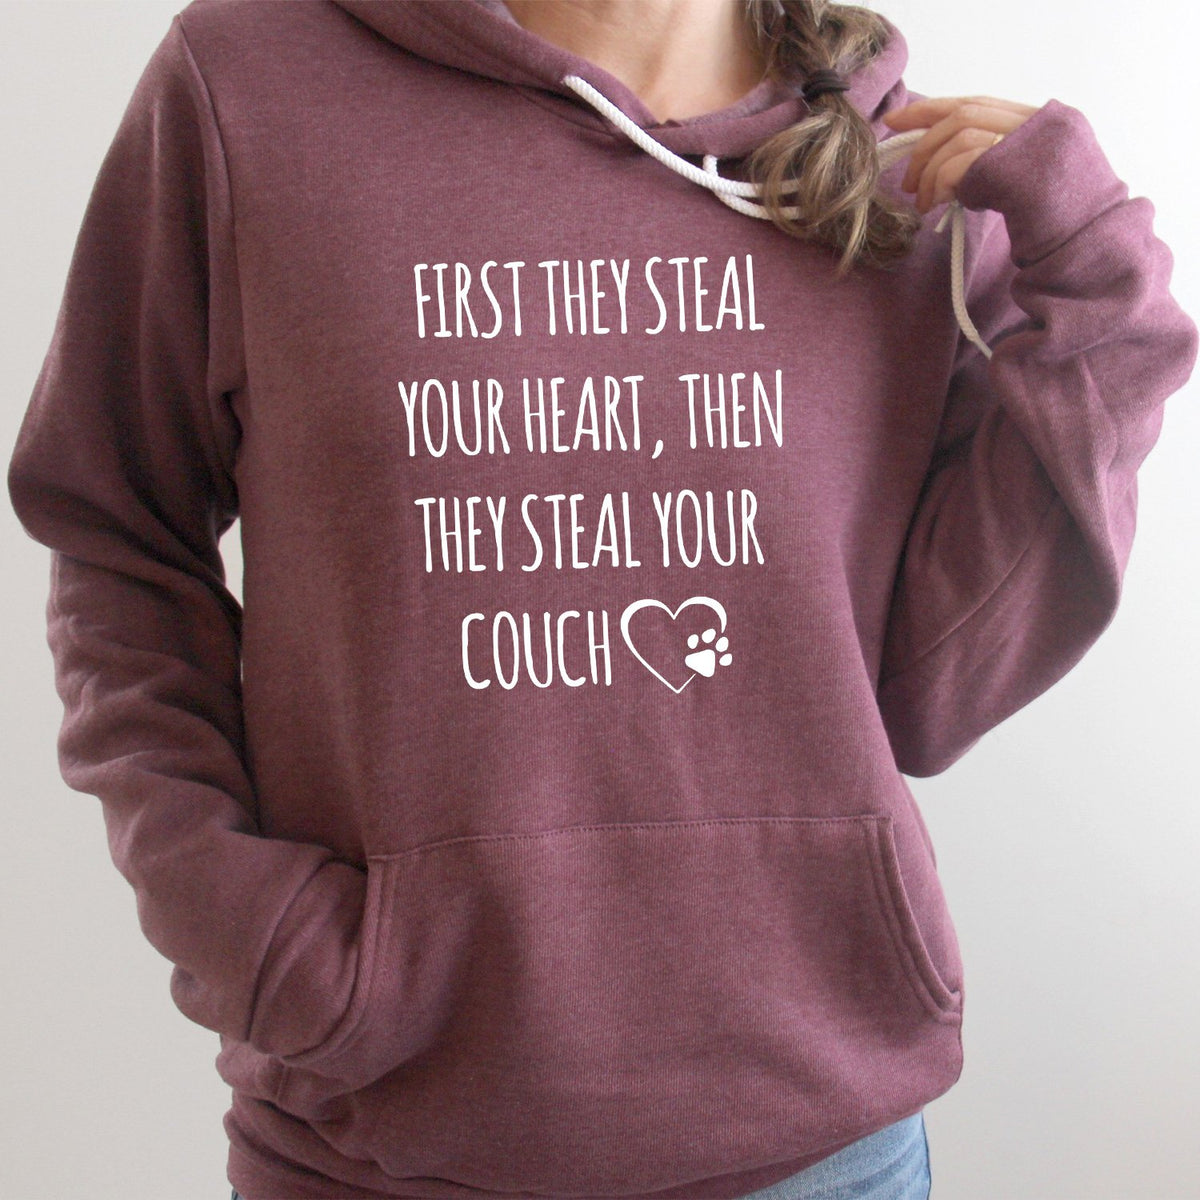 First They Steal Your Heart, Then They Steal Your Couch - Hoodie Sweatshirt